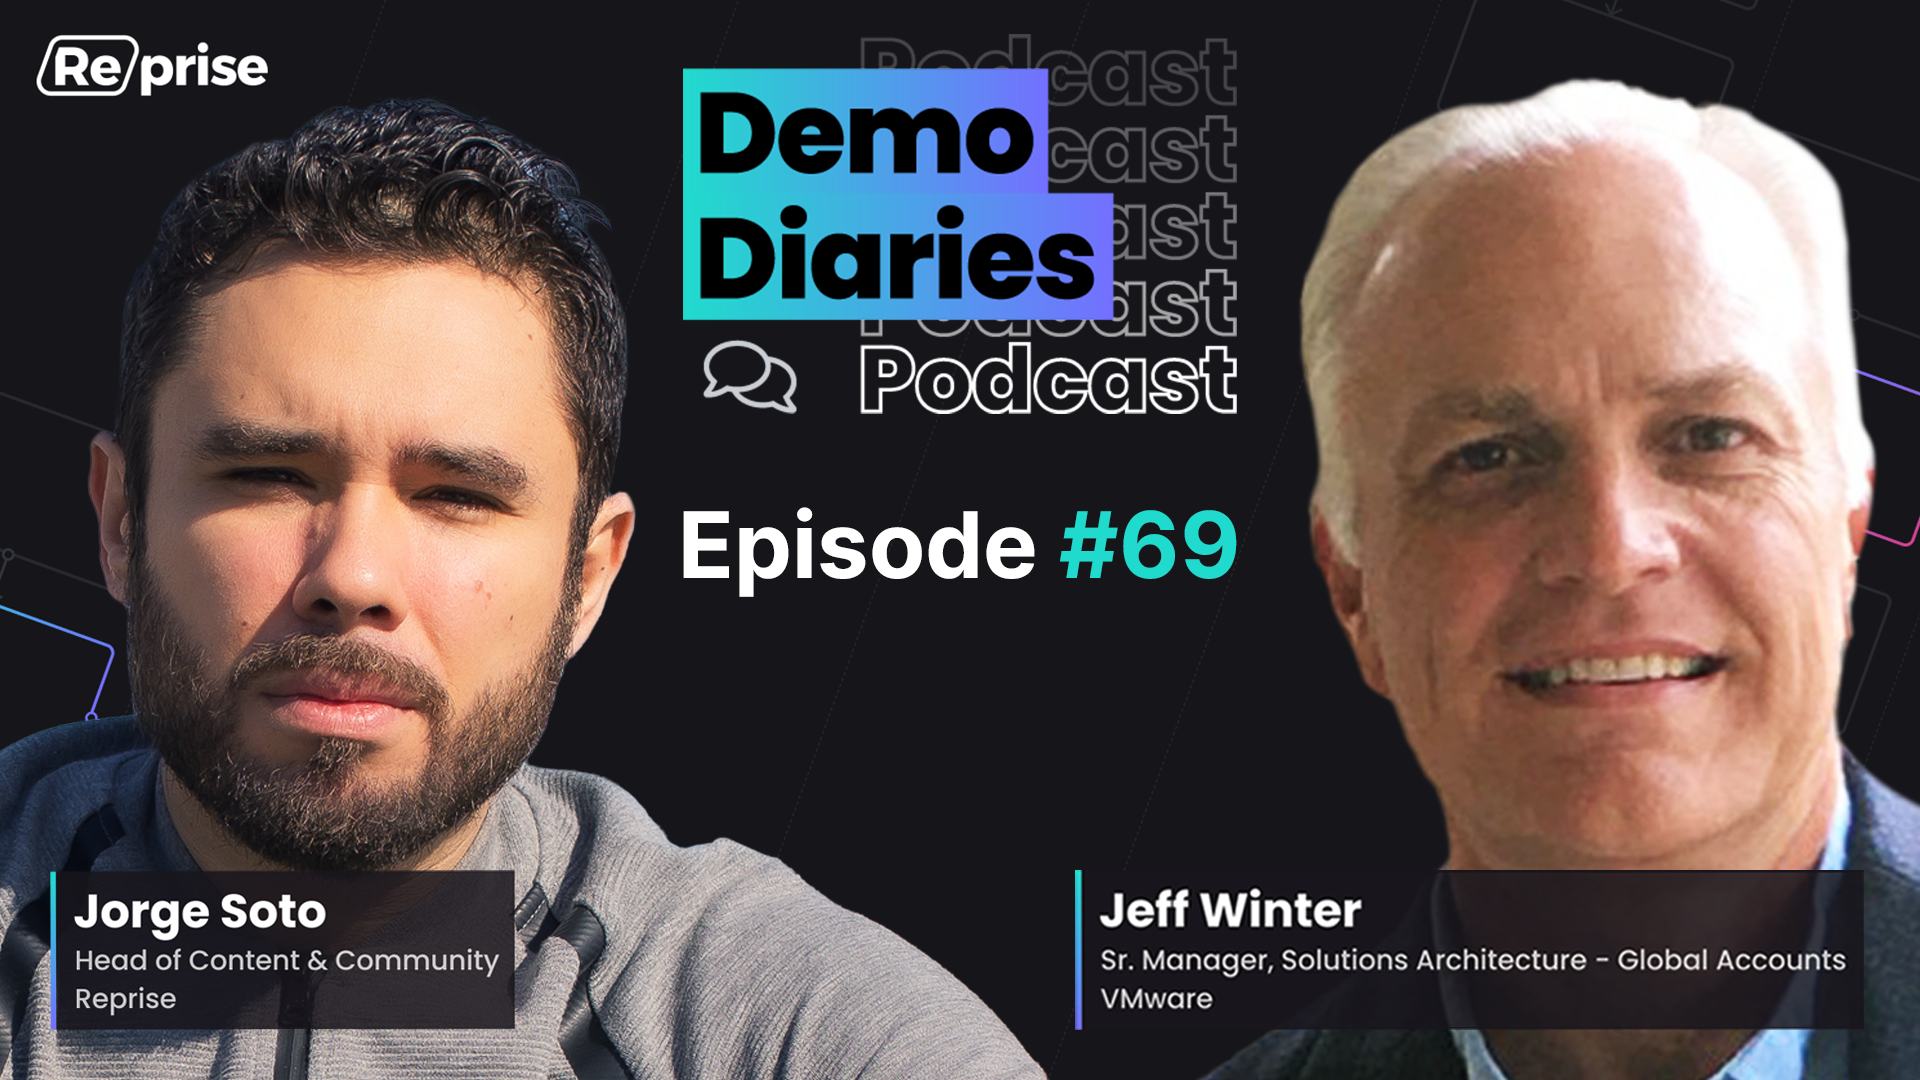 Demo Diaries: Ep 069 | “Reimagining Sales Through Vision, Value, and Outcome”